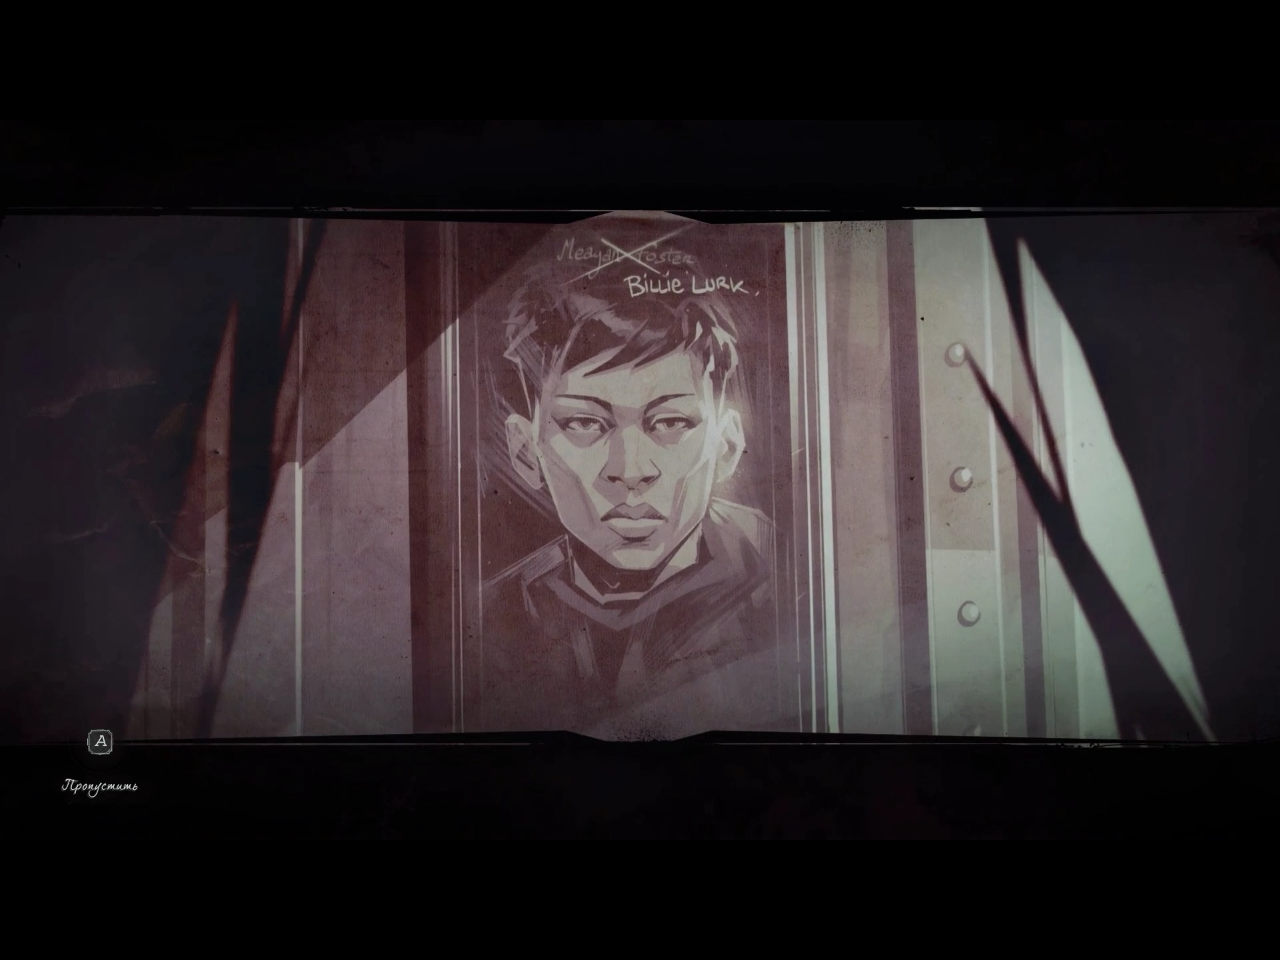 Dishonored Death of the Outsider. #1 Билли Лерк